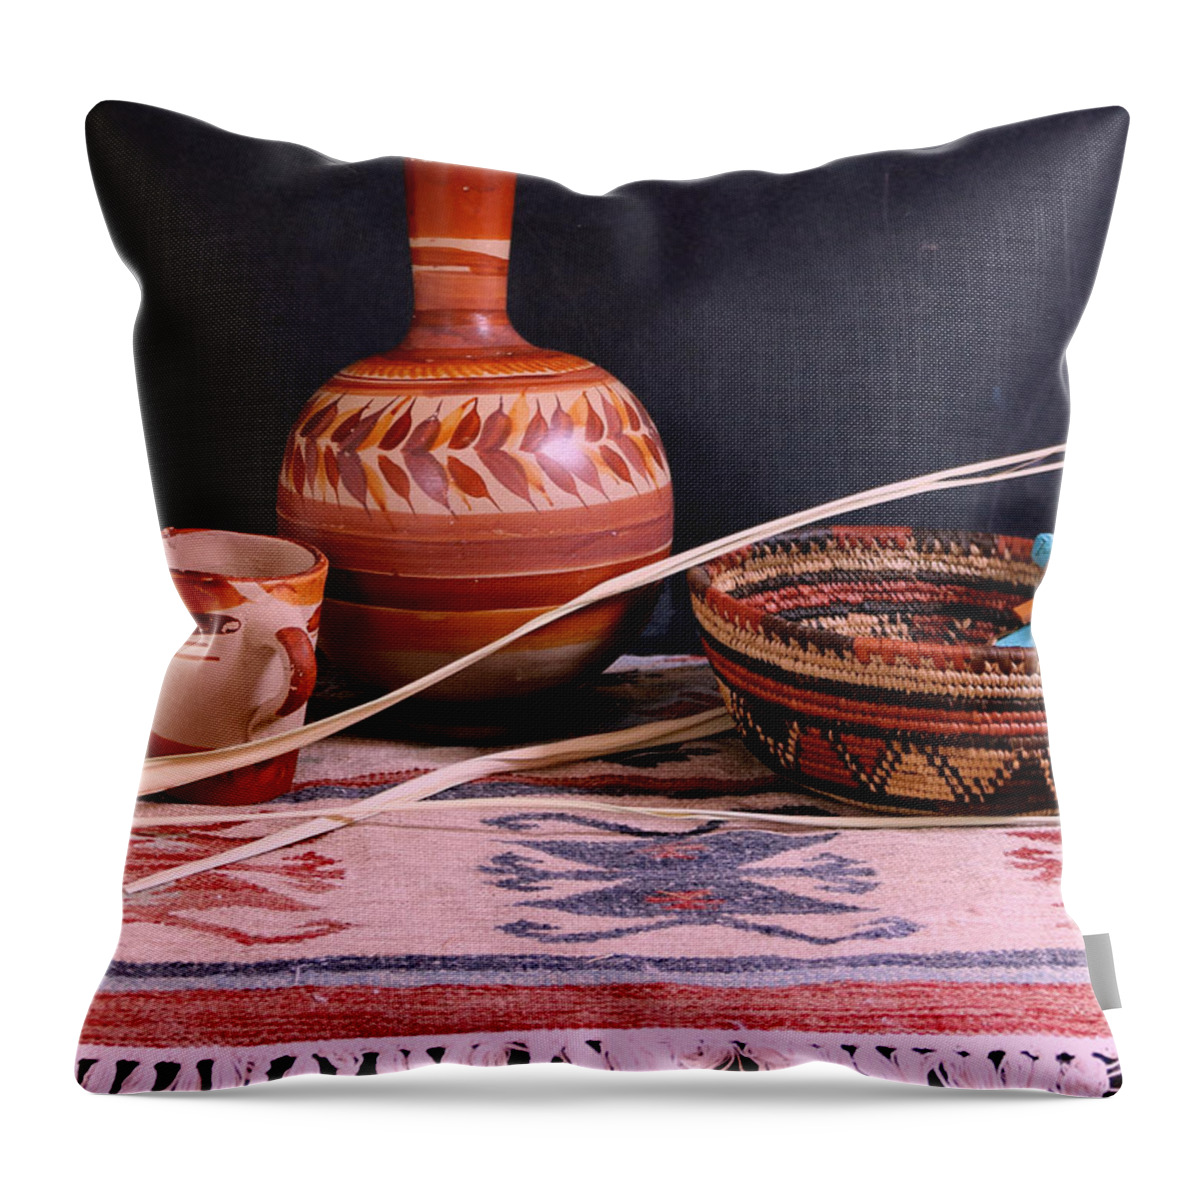 Still Life Throw Pillow featuring the photograph Water Jug 4 by M Diane Bonaparte